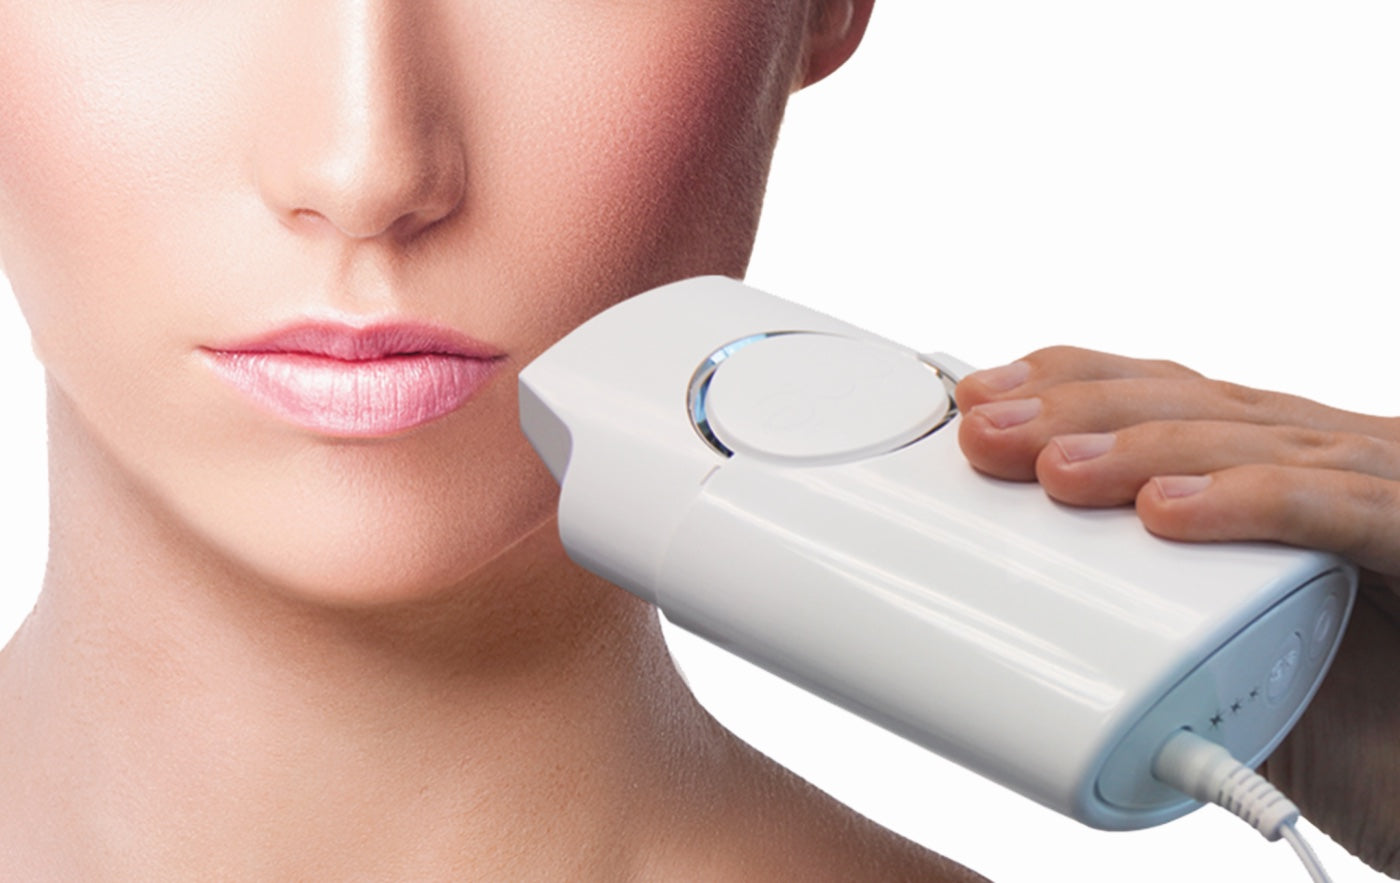 mē Chic Professional Face & Body Permanent Hair Reduction System (FDA-Cleared)